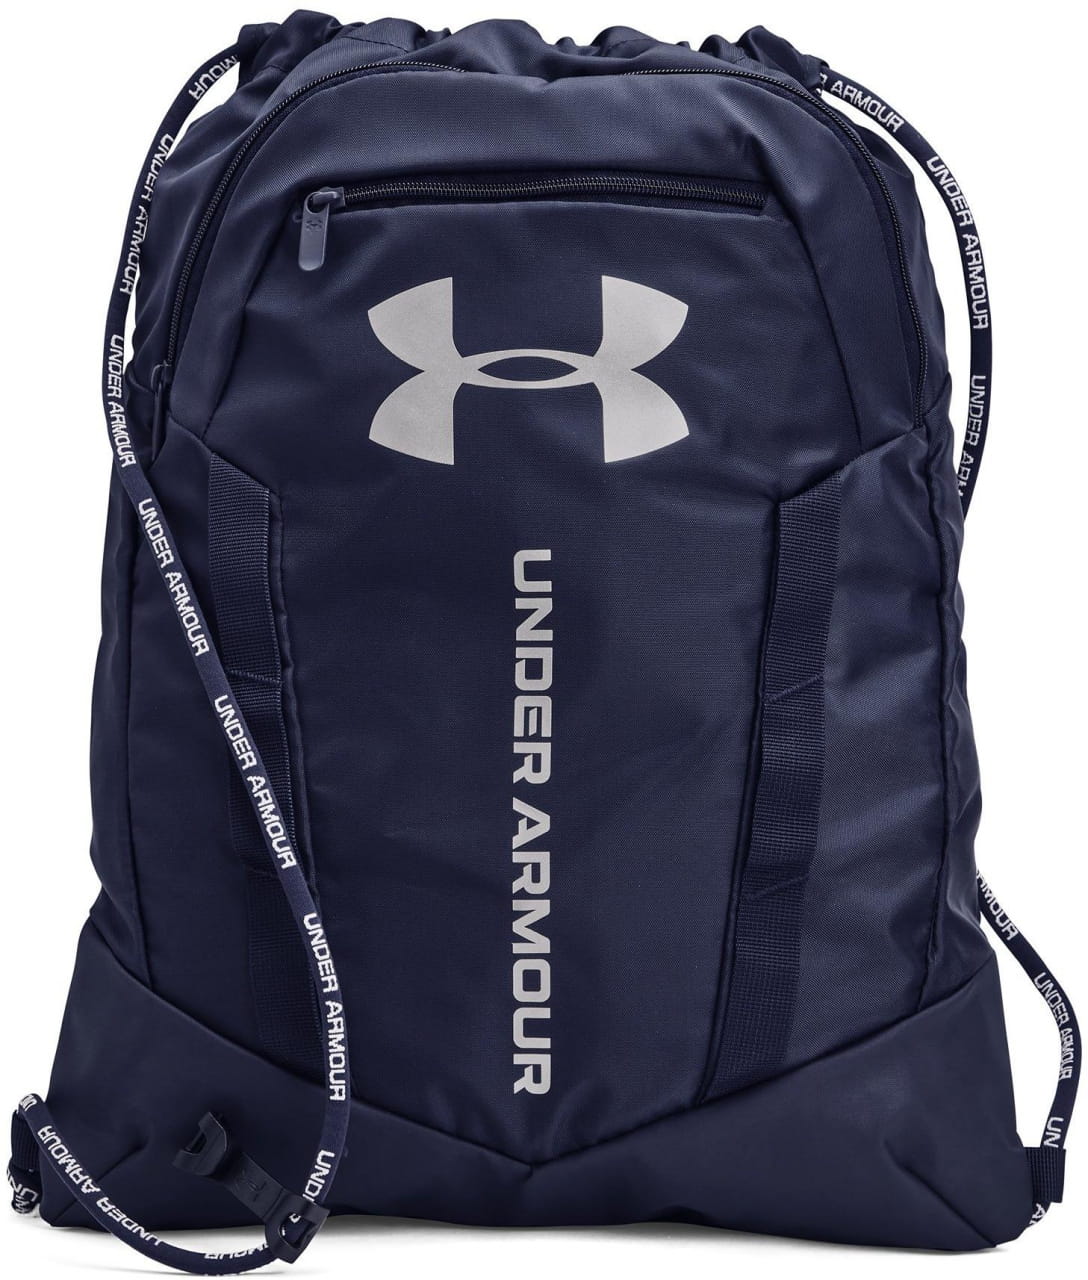 Sac de sport Under Armour Undeniable Sackpack-NVY